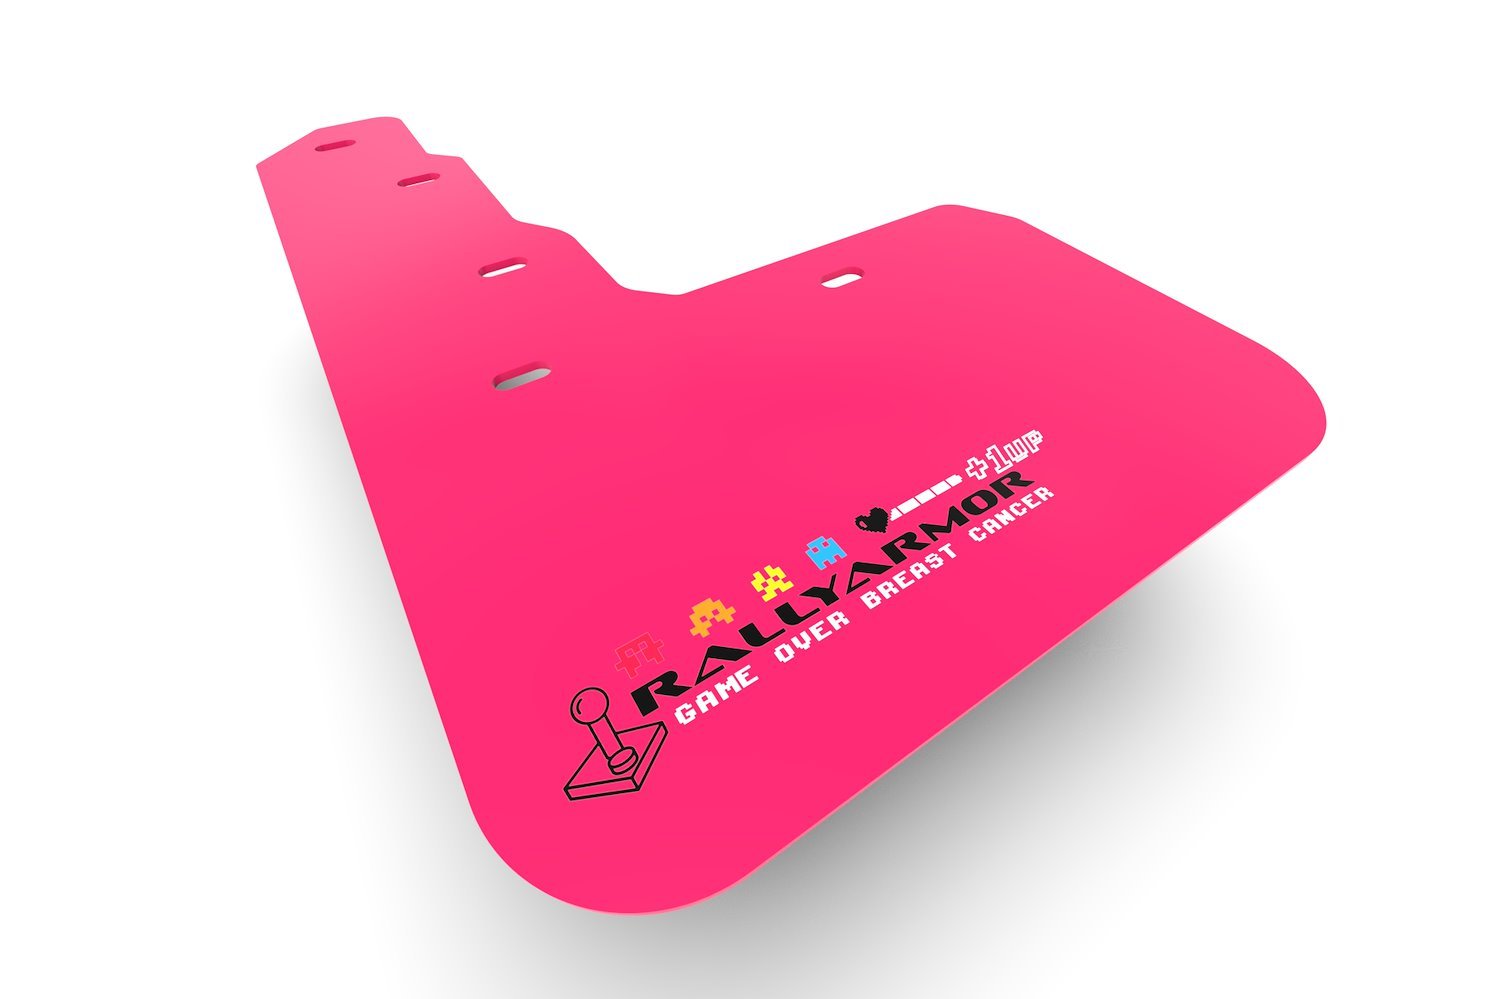 MF76-BCE22-PK/BLK Mud Flap Kit with BCE Logo fits  Select Subaru Forester/Wilderness - Pink Mud Flap/Breast Cancer Logo